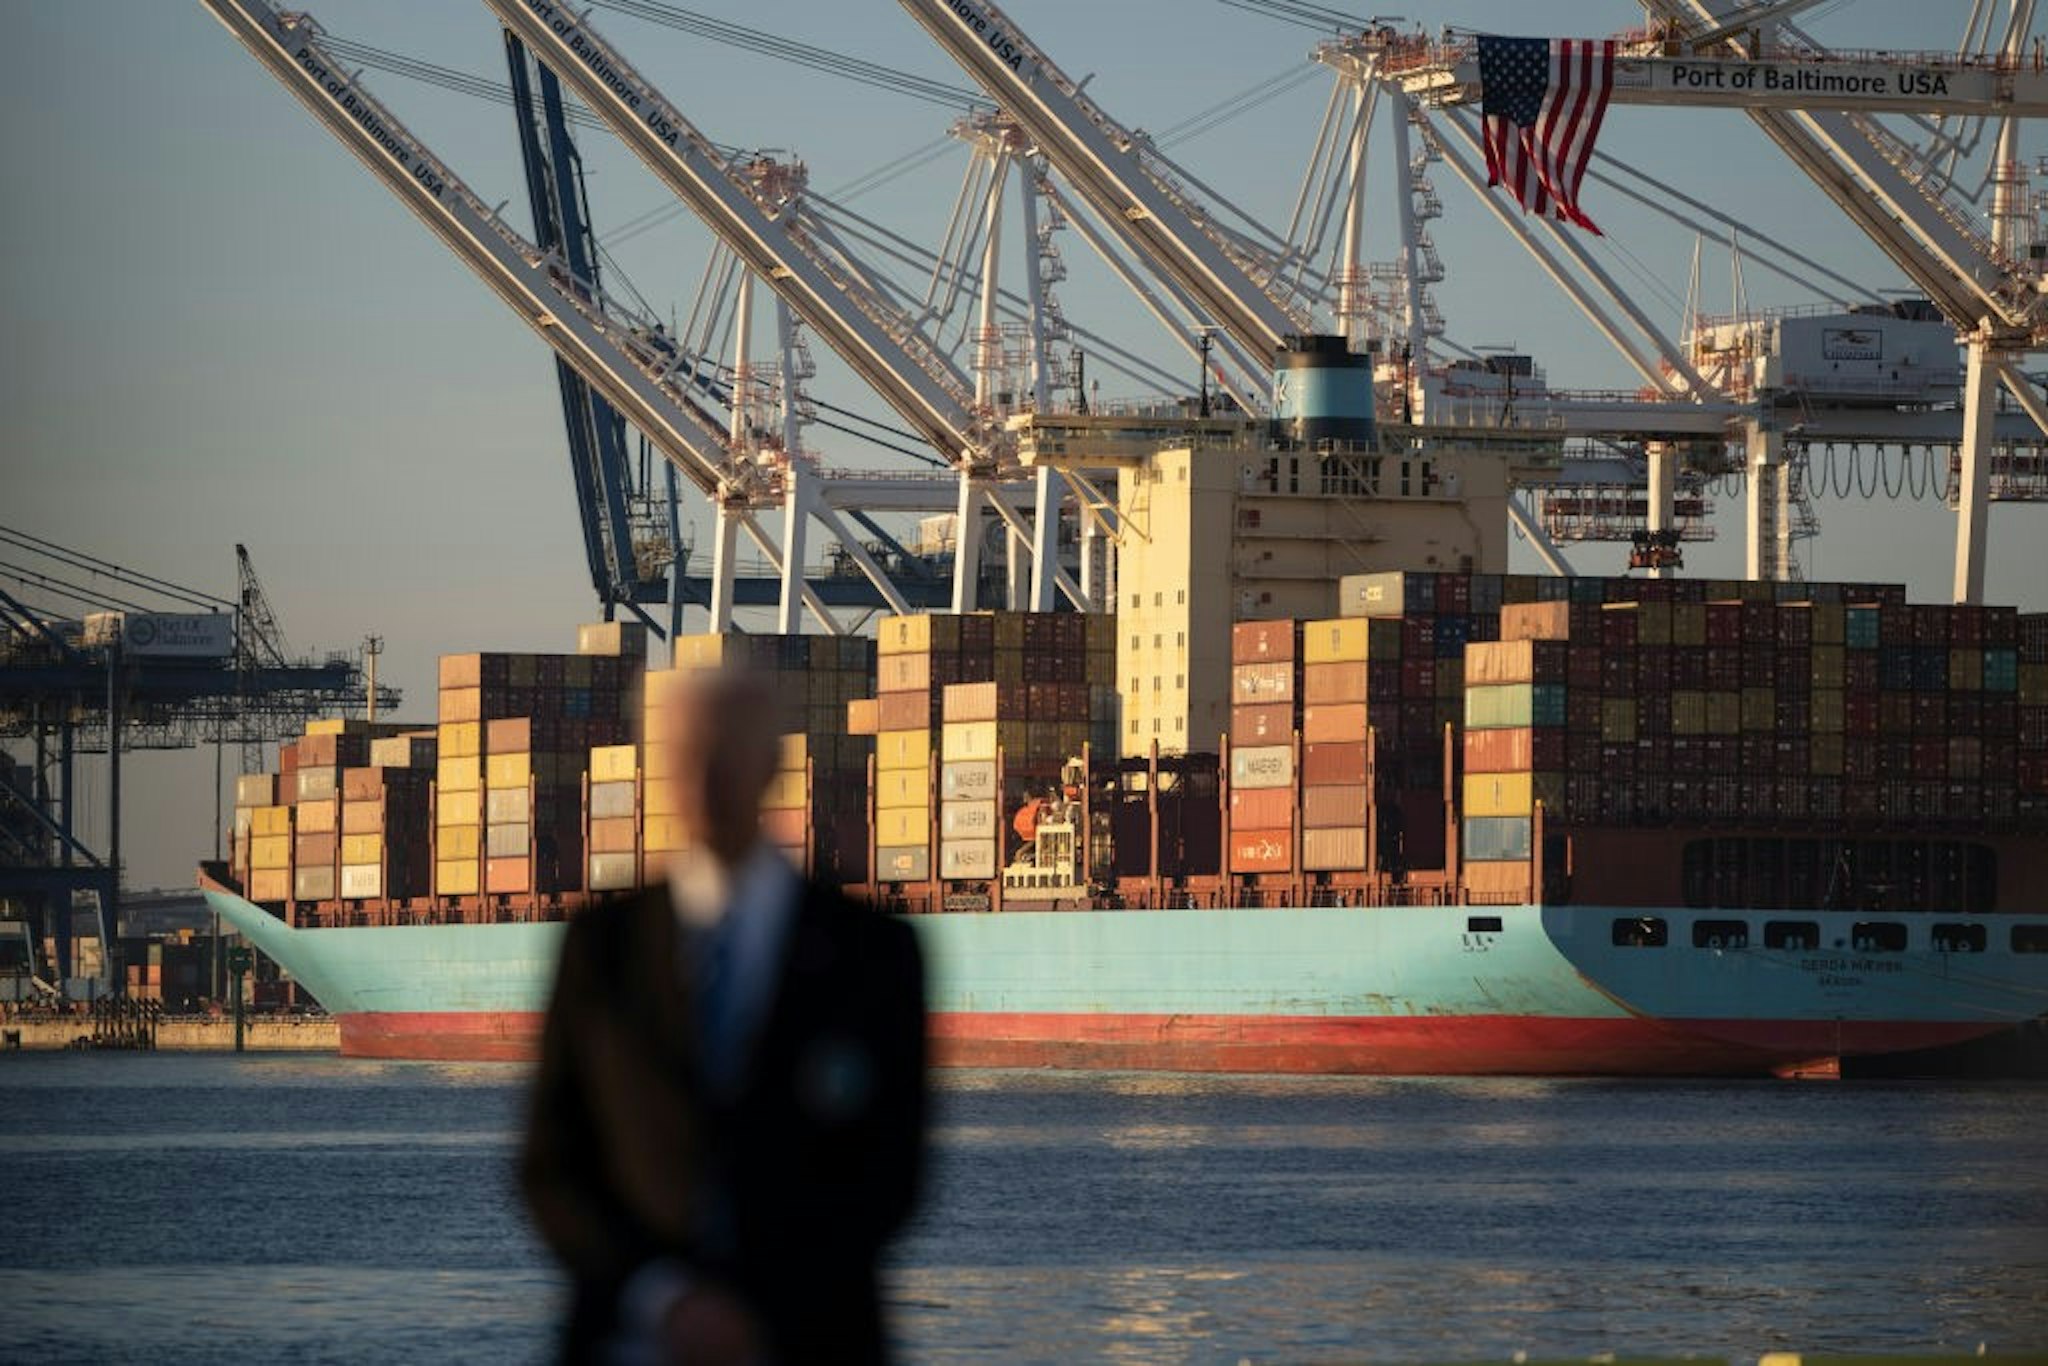 BALTIMORE, MD - NOVEMBER 10: U.S. President Joe Biden waits to speak about the recently passed $1.2 trillion Infrastructure Investment and Jobs Act at the Port of Baltimore on November 10, 2021 in Baltimore, Maryland. President Biden will sign the bill next week, where he plans to bring Democrats and Republicans to the White House for a ceremony to mark the bipartisan bill's passage. (Photo by